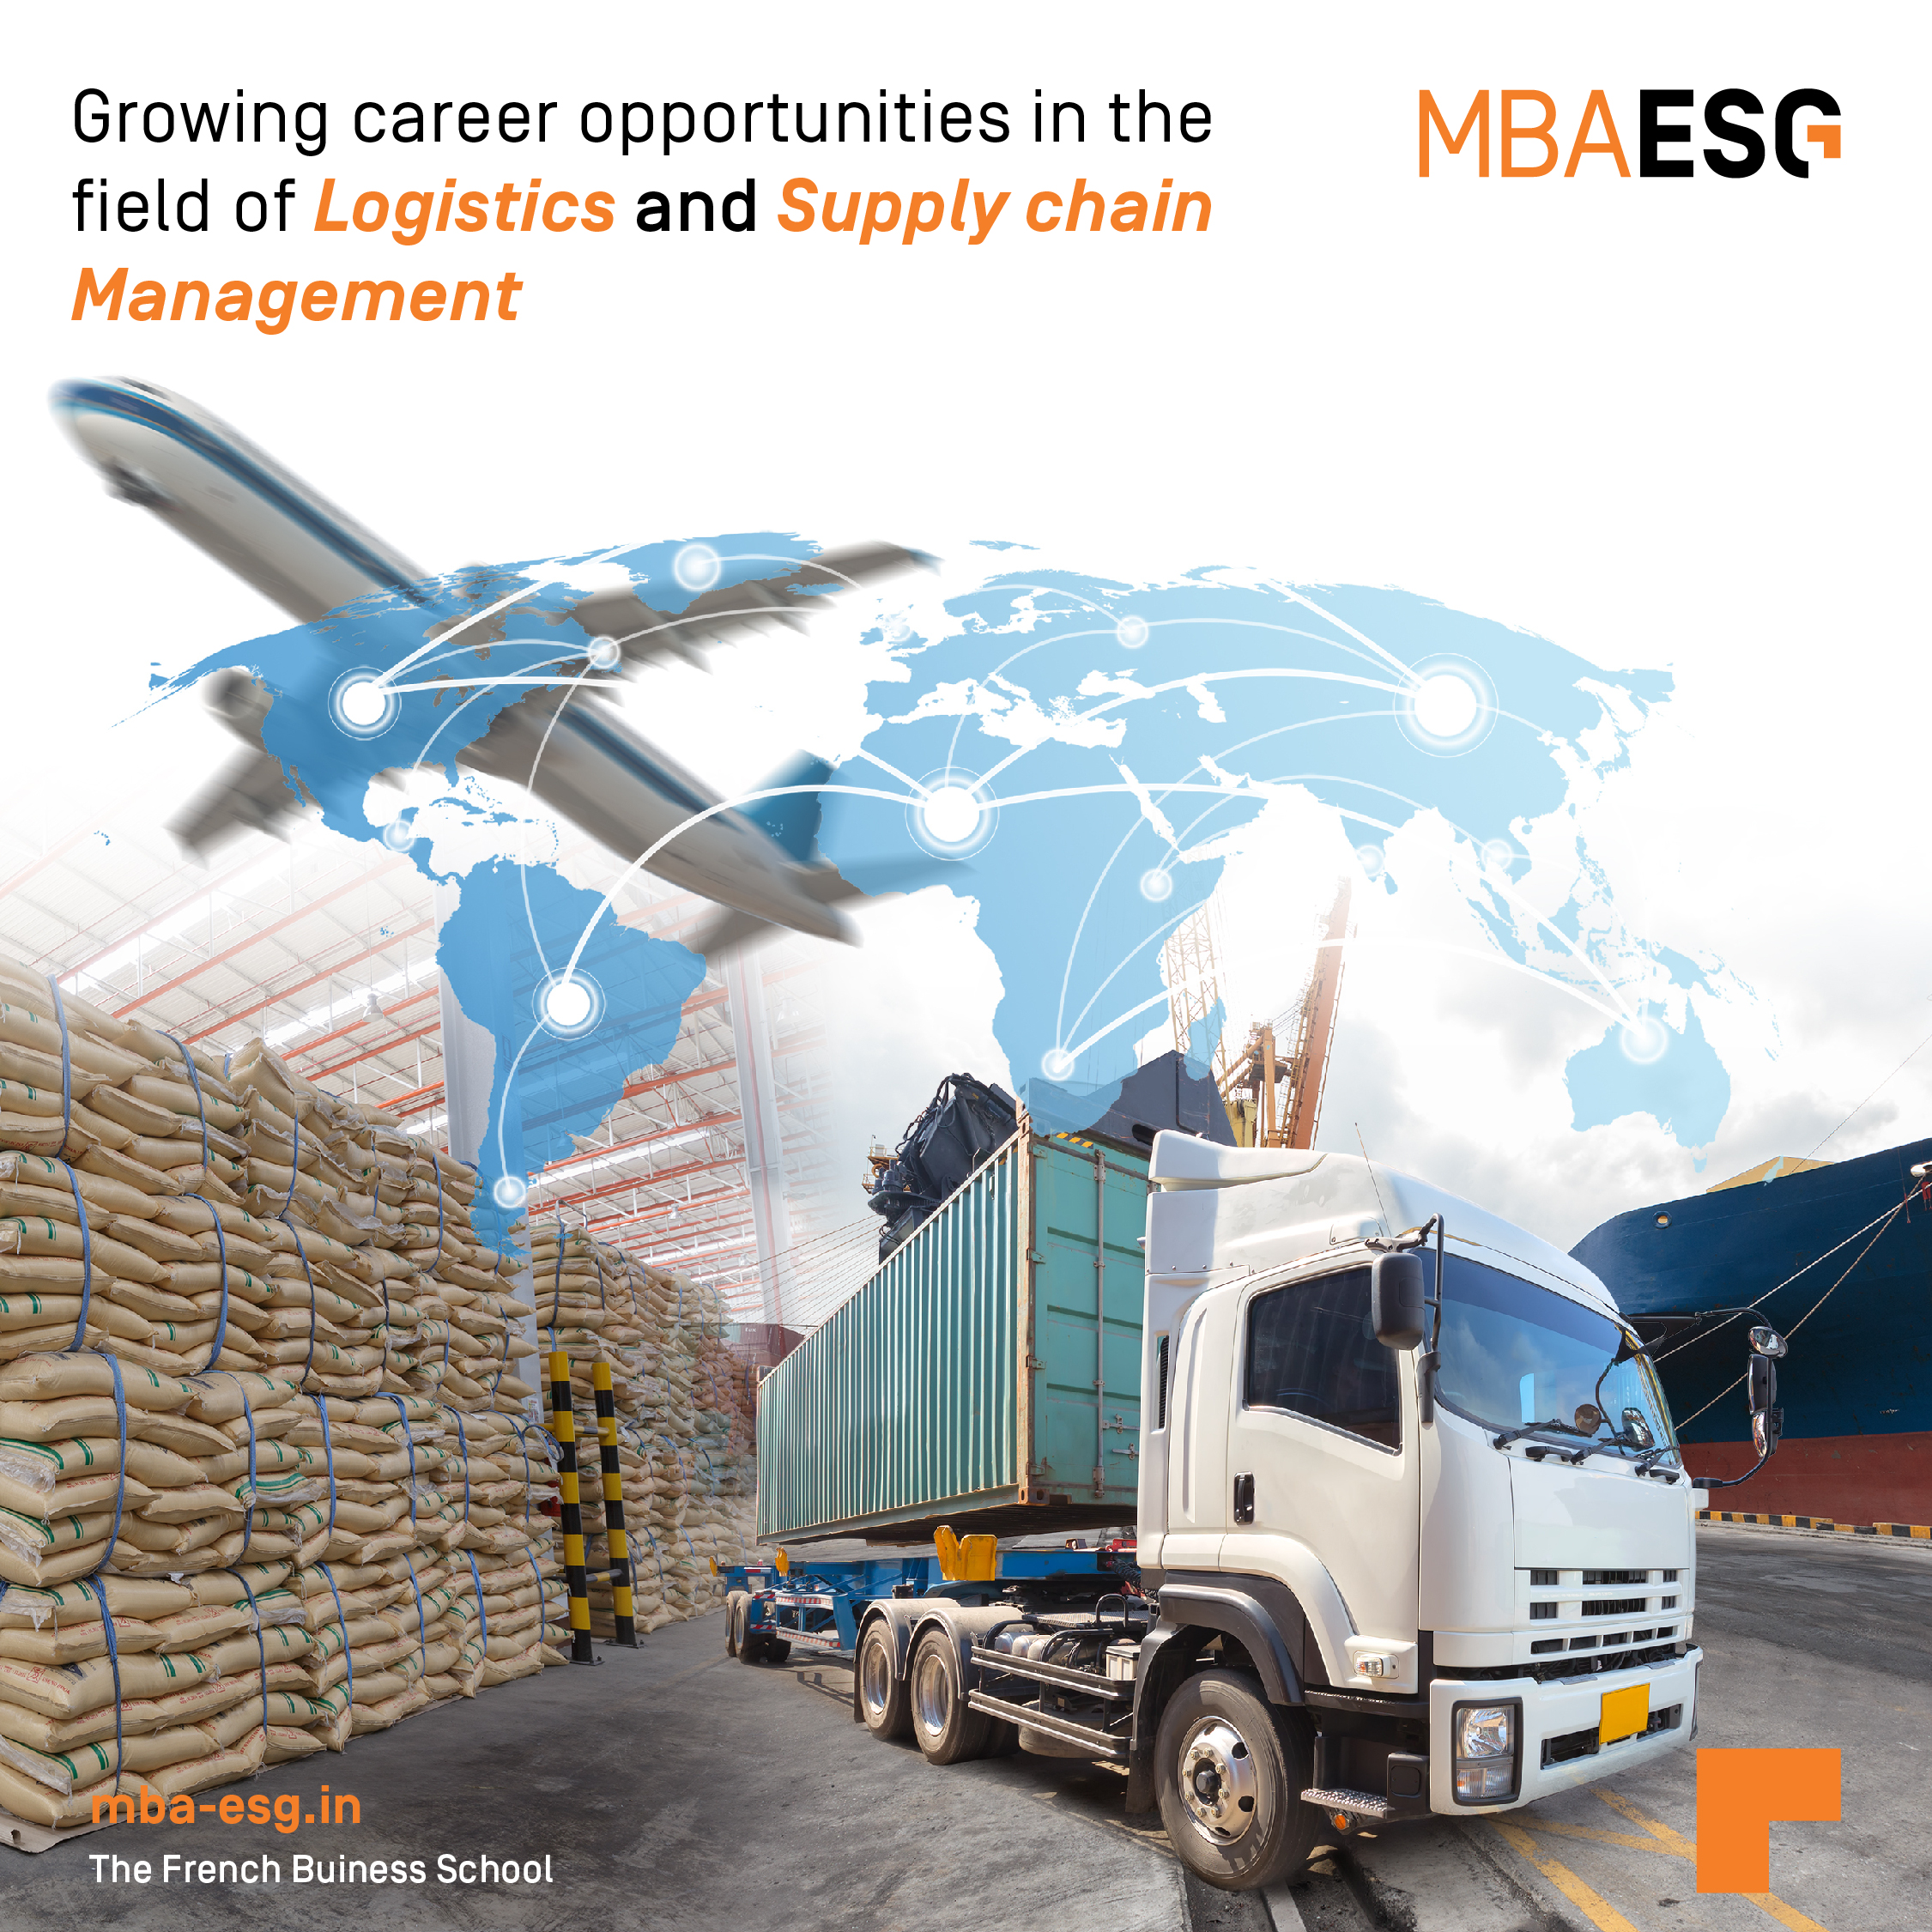 Growing career opportunities in the field of logistics and supply chain management